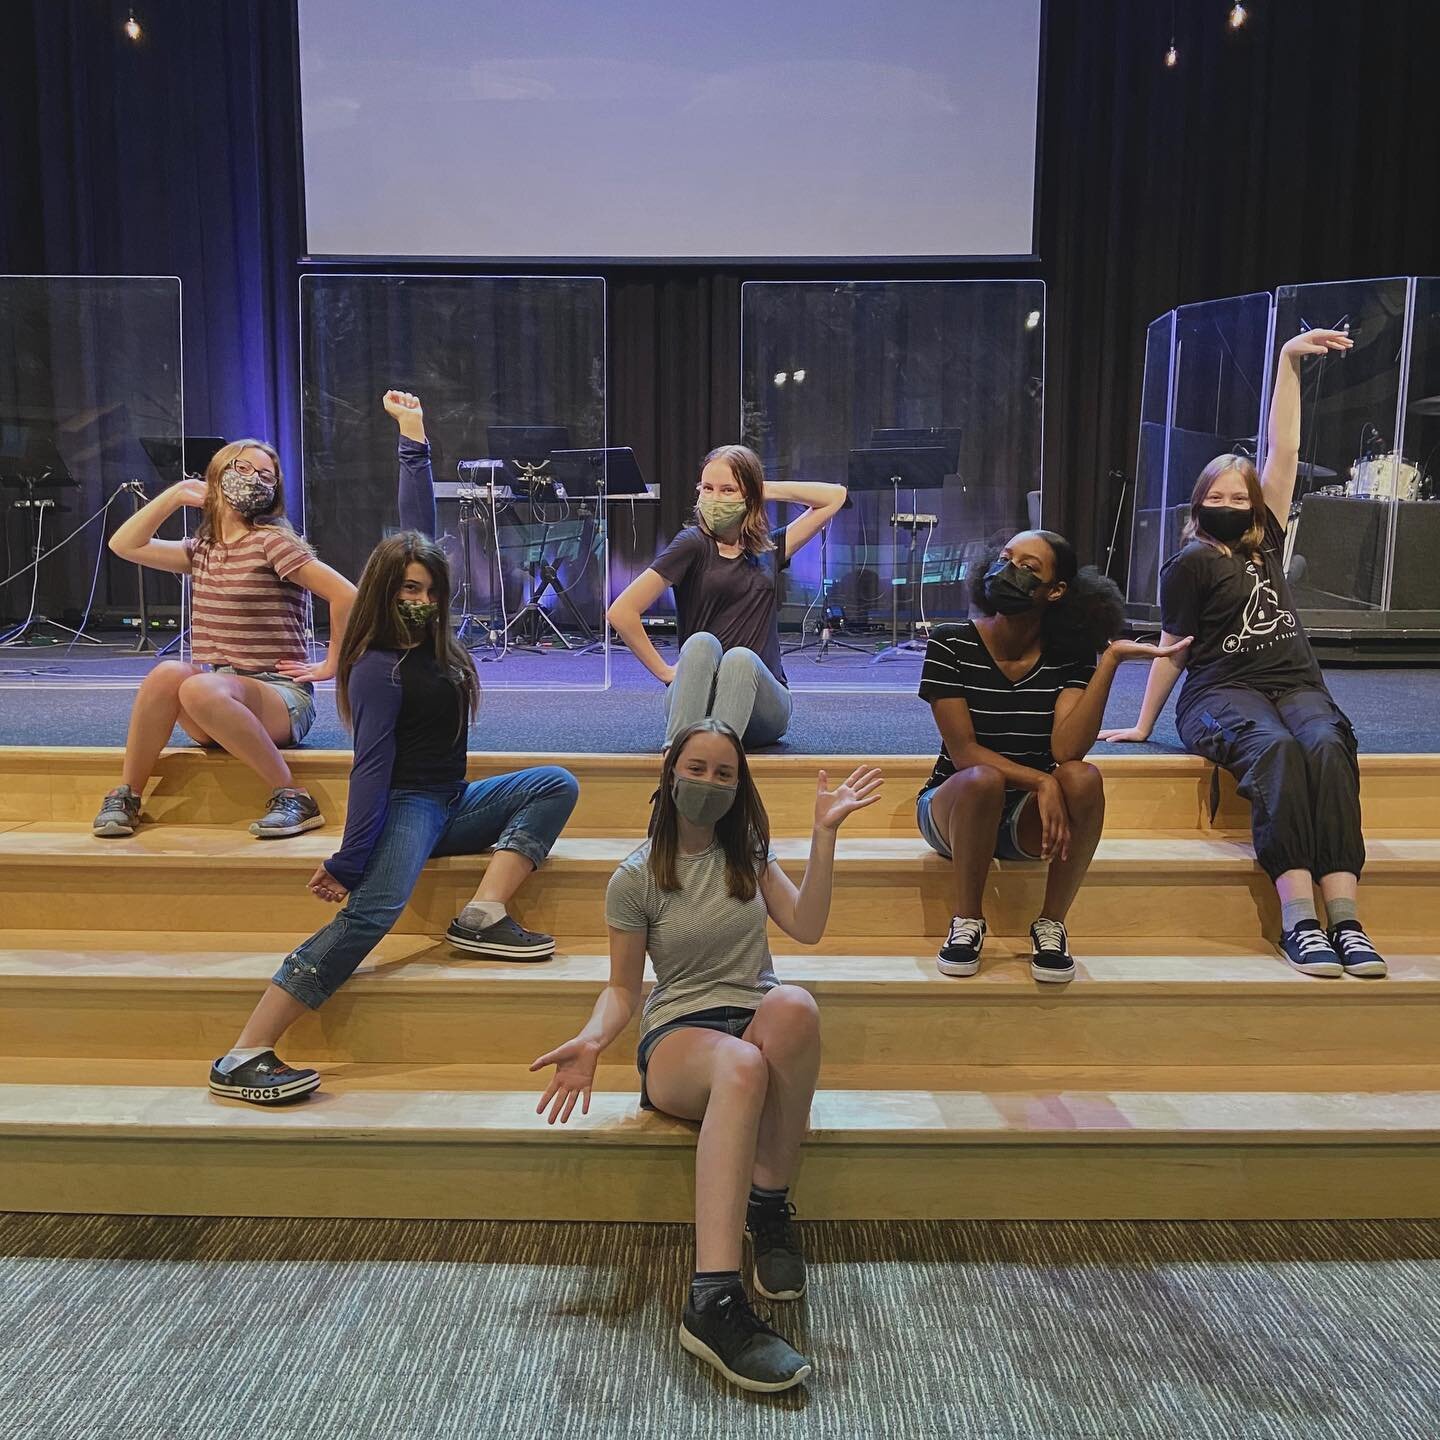 Who&rsquo;s ready to Press Play?!

Groovers, are you ready to turn up the volume next week alongside our amazing dance team!

#kingstchurch #kscc #vdcdance #vbskidscamp #pressplayvbs